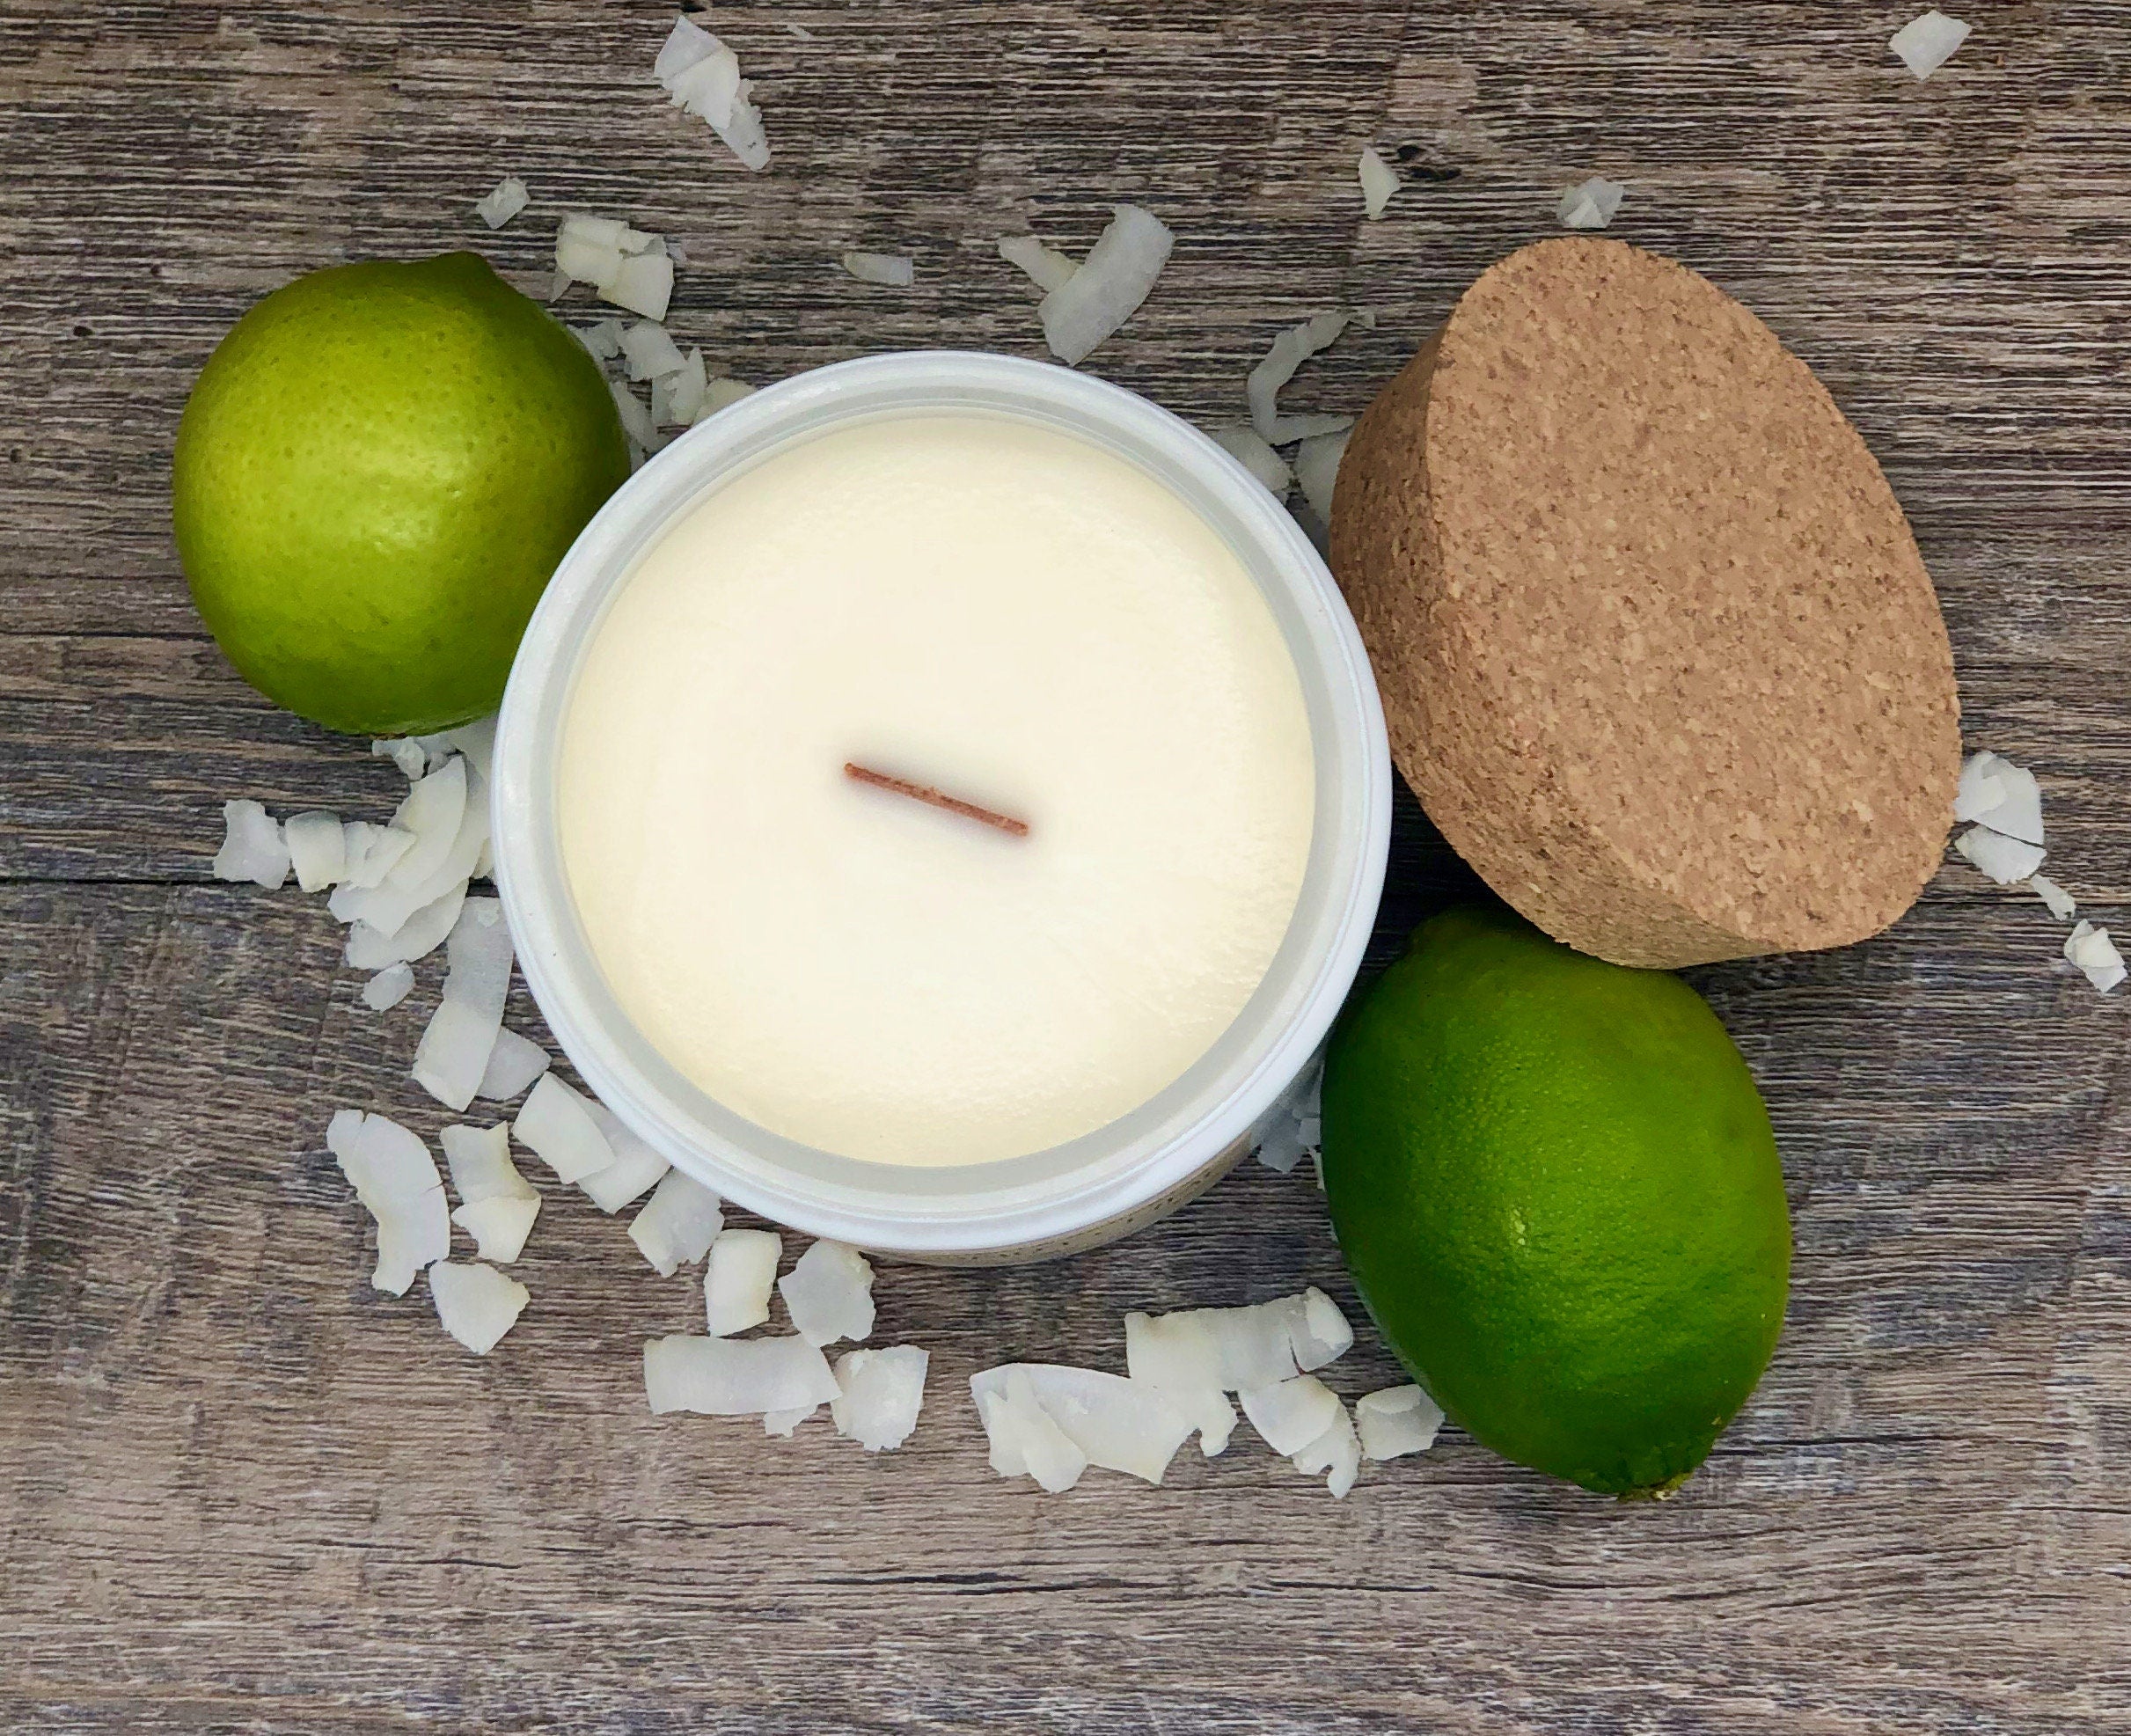 COCONUT + LIME  scented Soy Candle | 12oz Wood Wick Candle | Summer Candle | Positive Energy | Relaxing | Beach Scent | Endless Summer Days